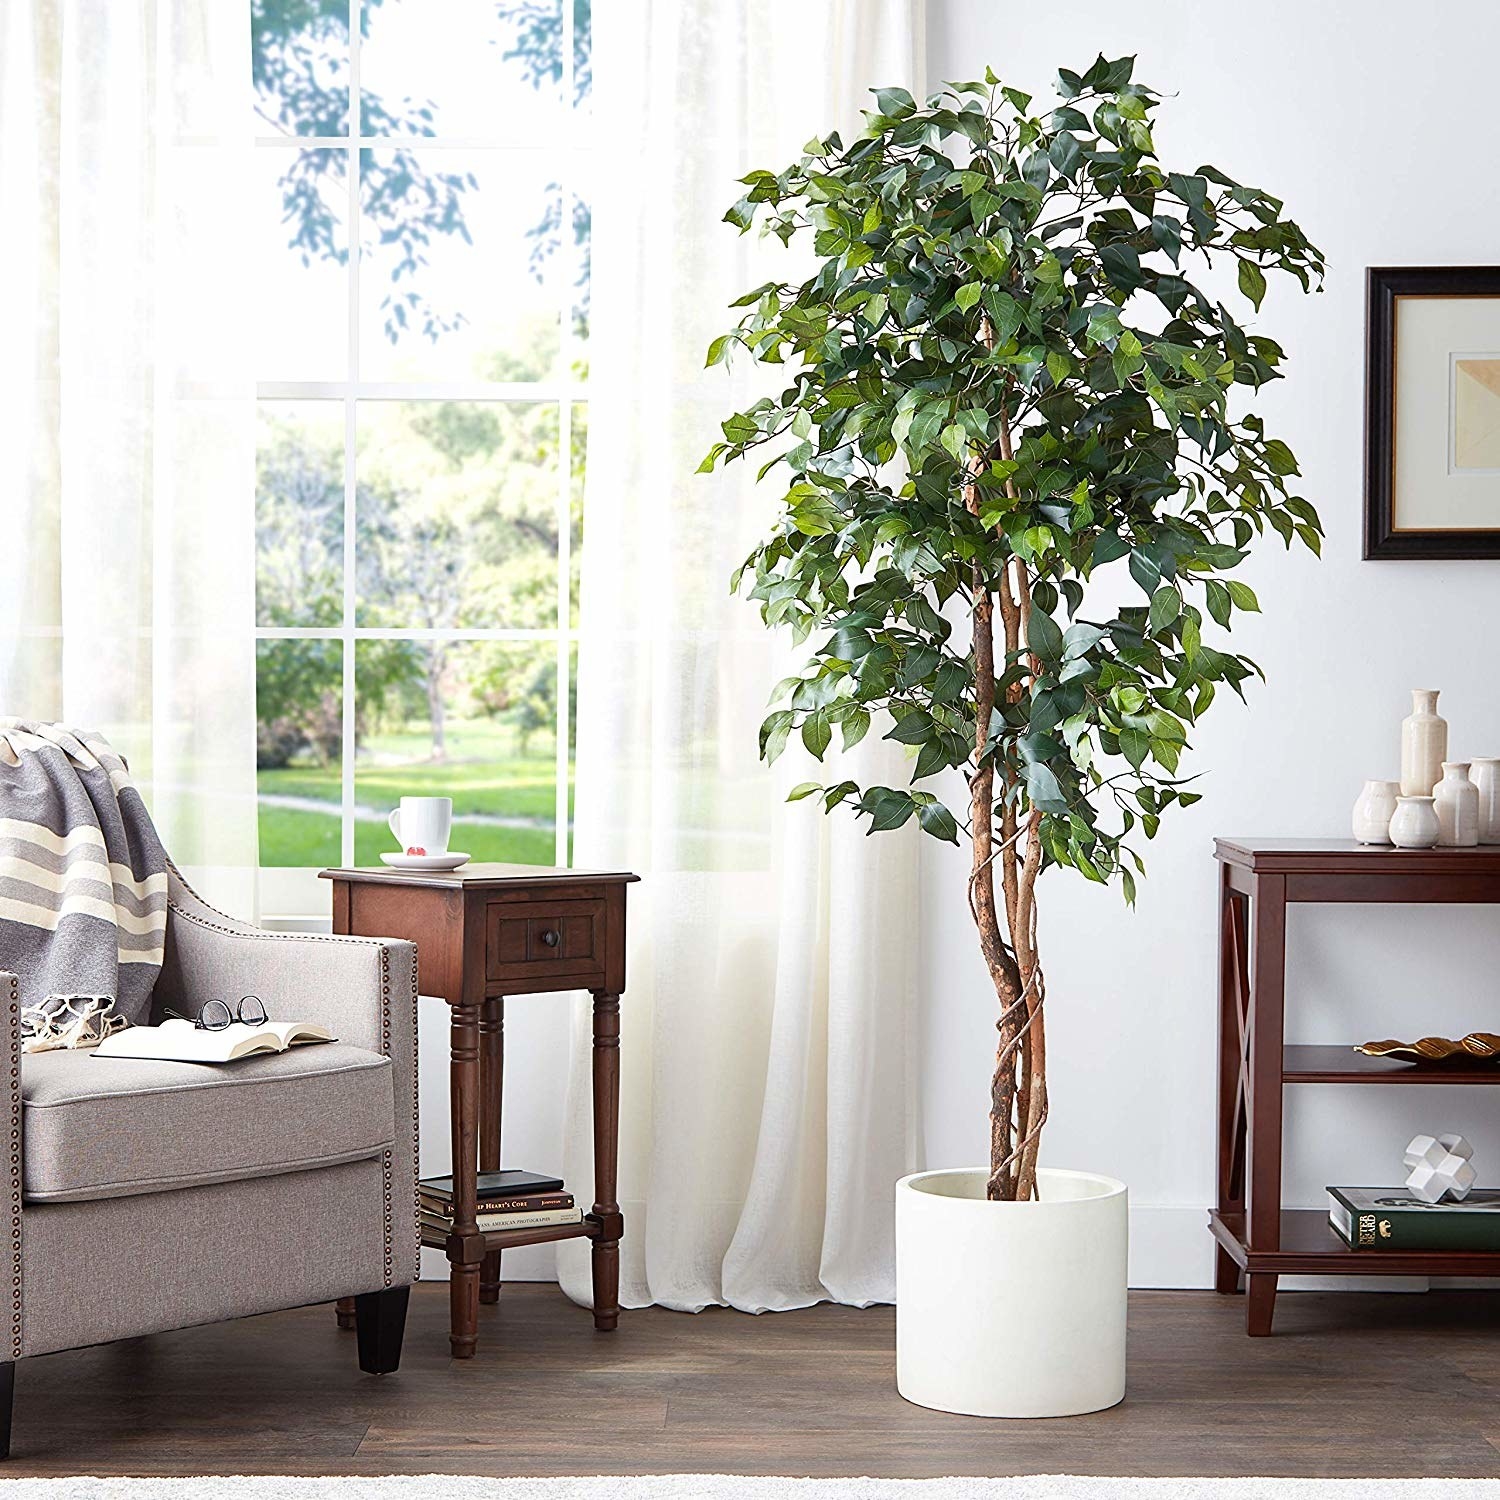 The tree in a white planter inside of a home